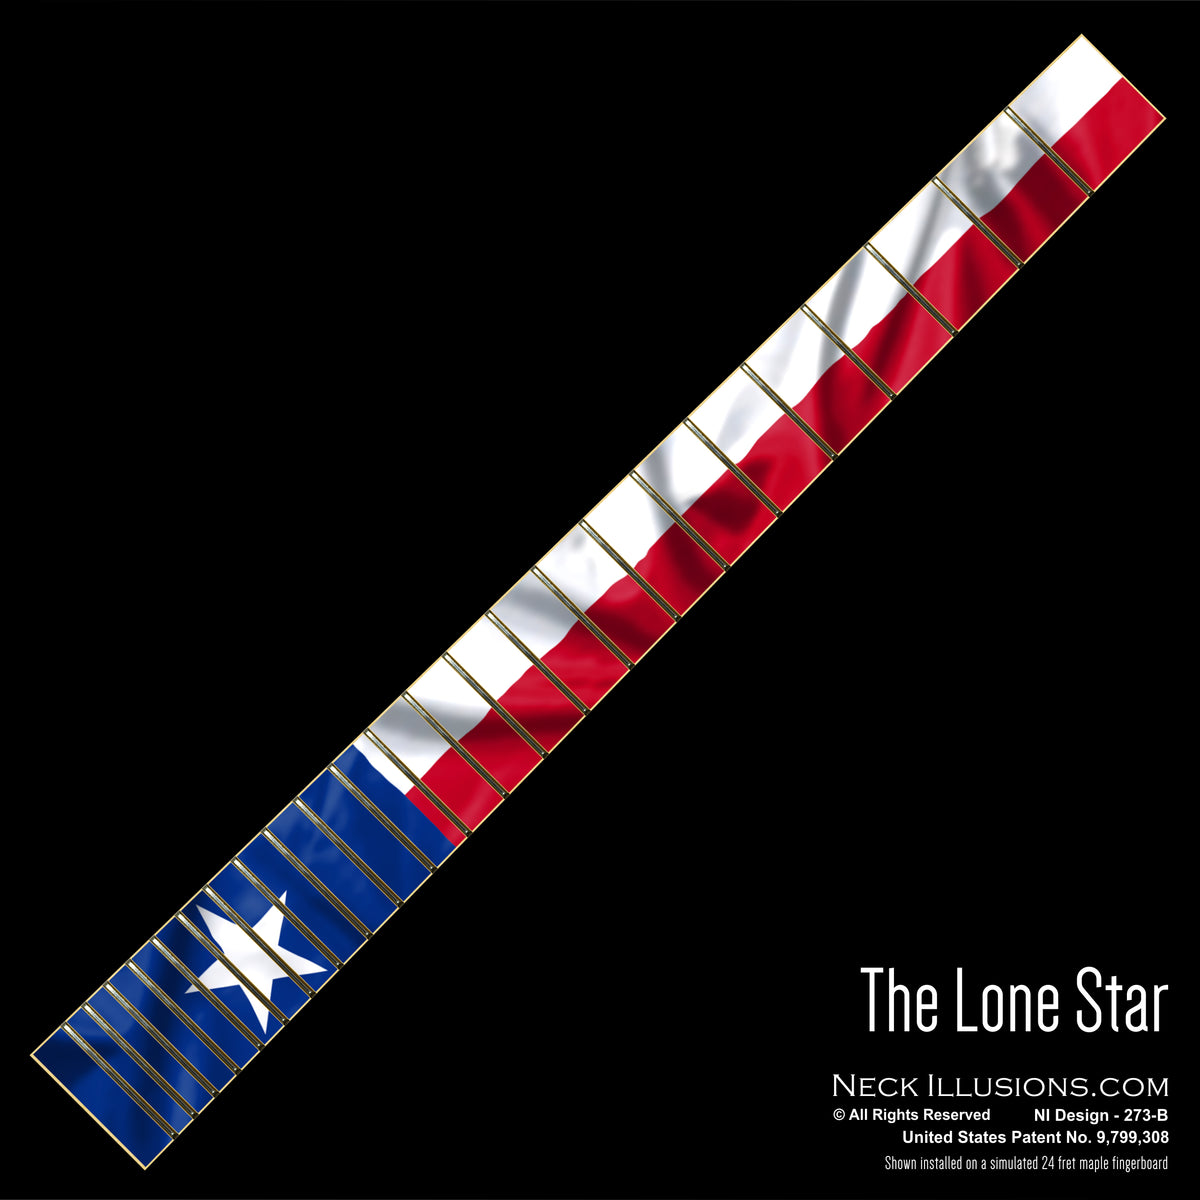 The Lone Star